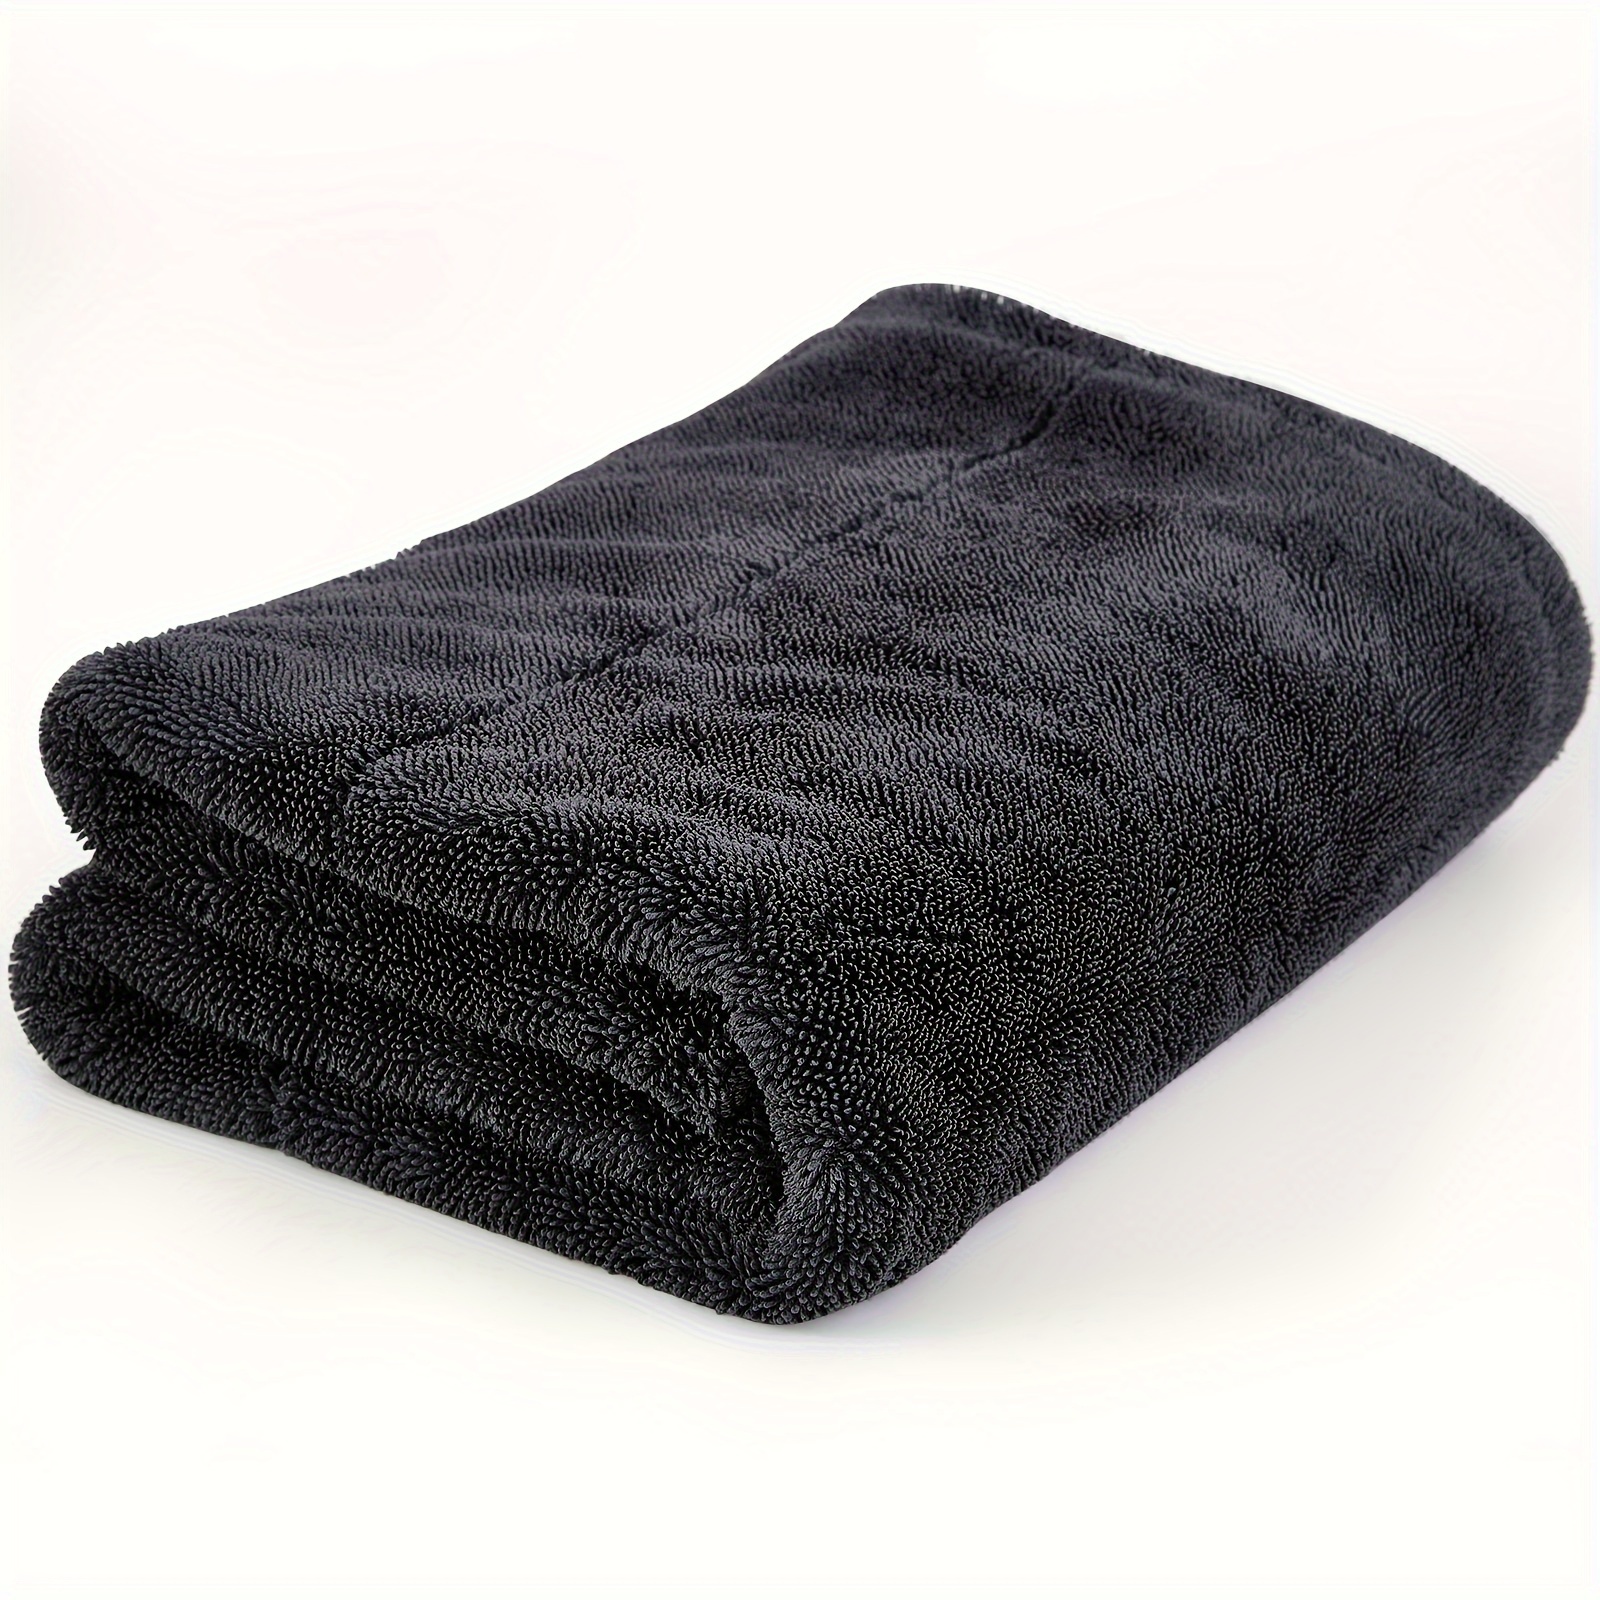 

[best Seller] Car Drying Towel Super Absorbent Black Line Drying Towel, Extra Large, Ultra Soft Microfiber 1300gsm Double Twisted-loop Drying Towel-auto Drying Towel For Cars Trucks Suv